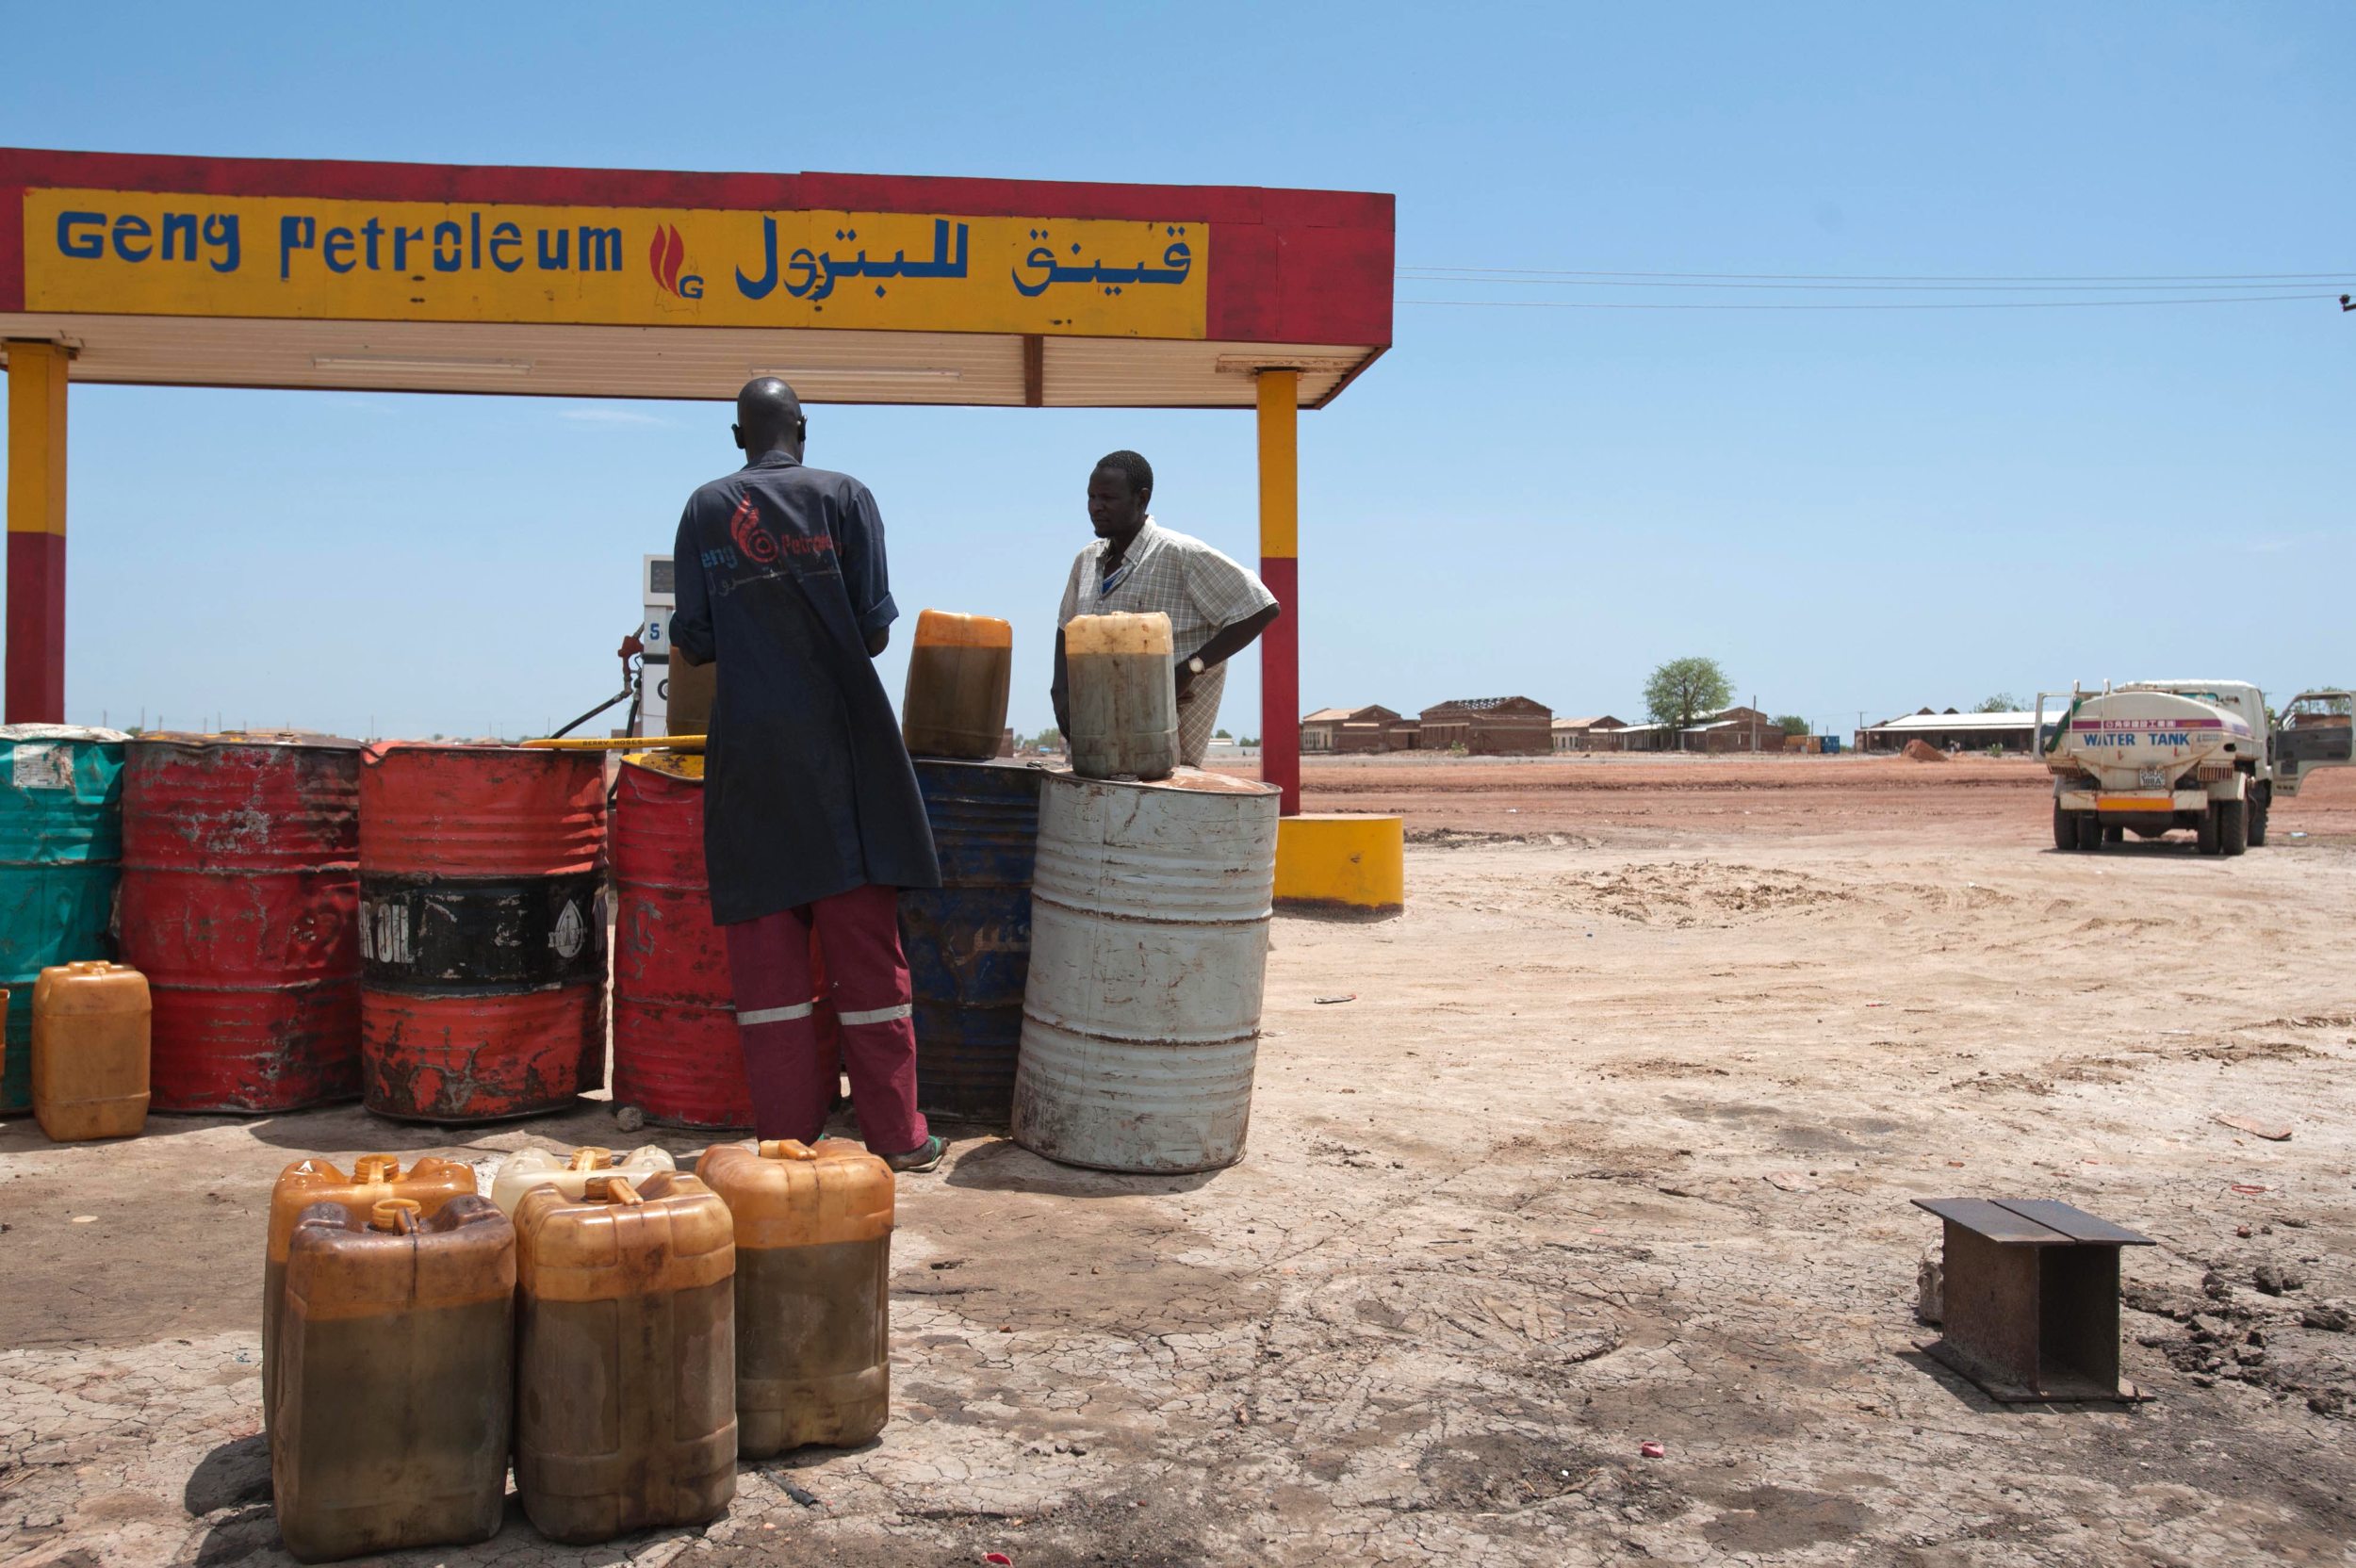 A truck driver buys a jerrycan of petrol for around 300 South Sudanese Pounds ($100) at a makeshift gas station in Bentiu, Unity State, on 23 May 2012 (AFP)